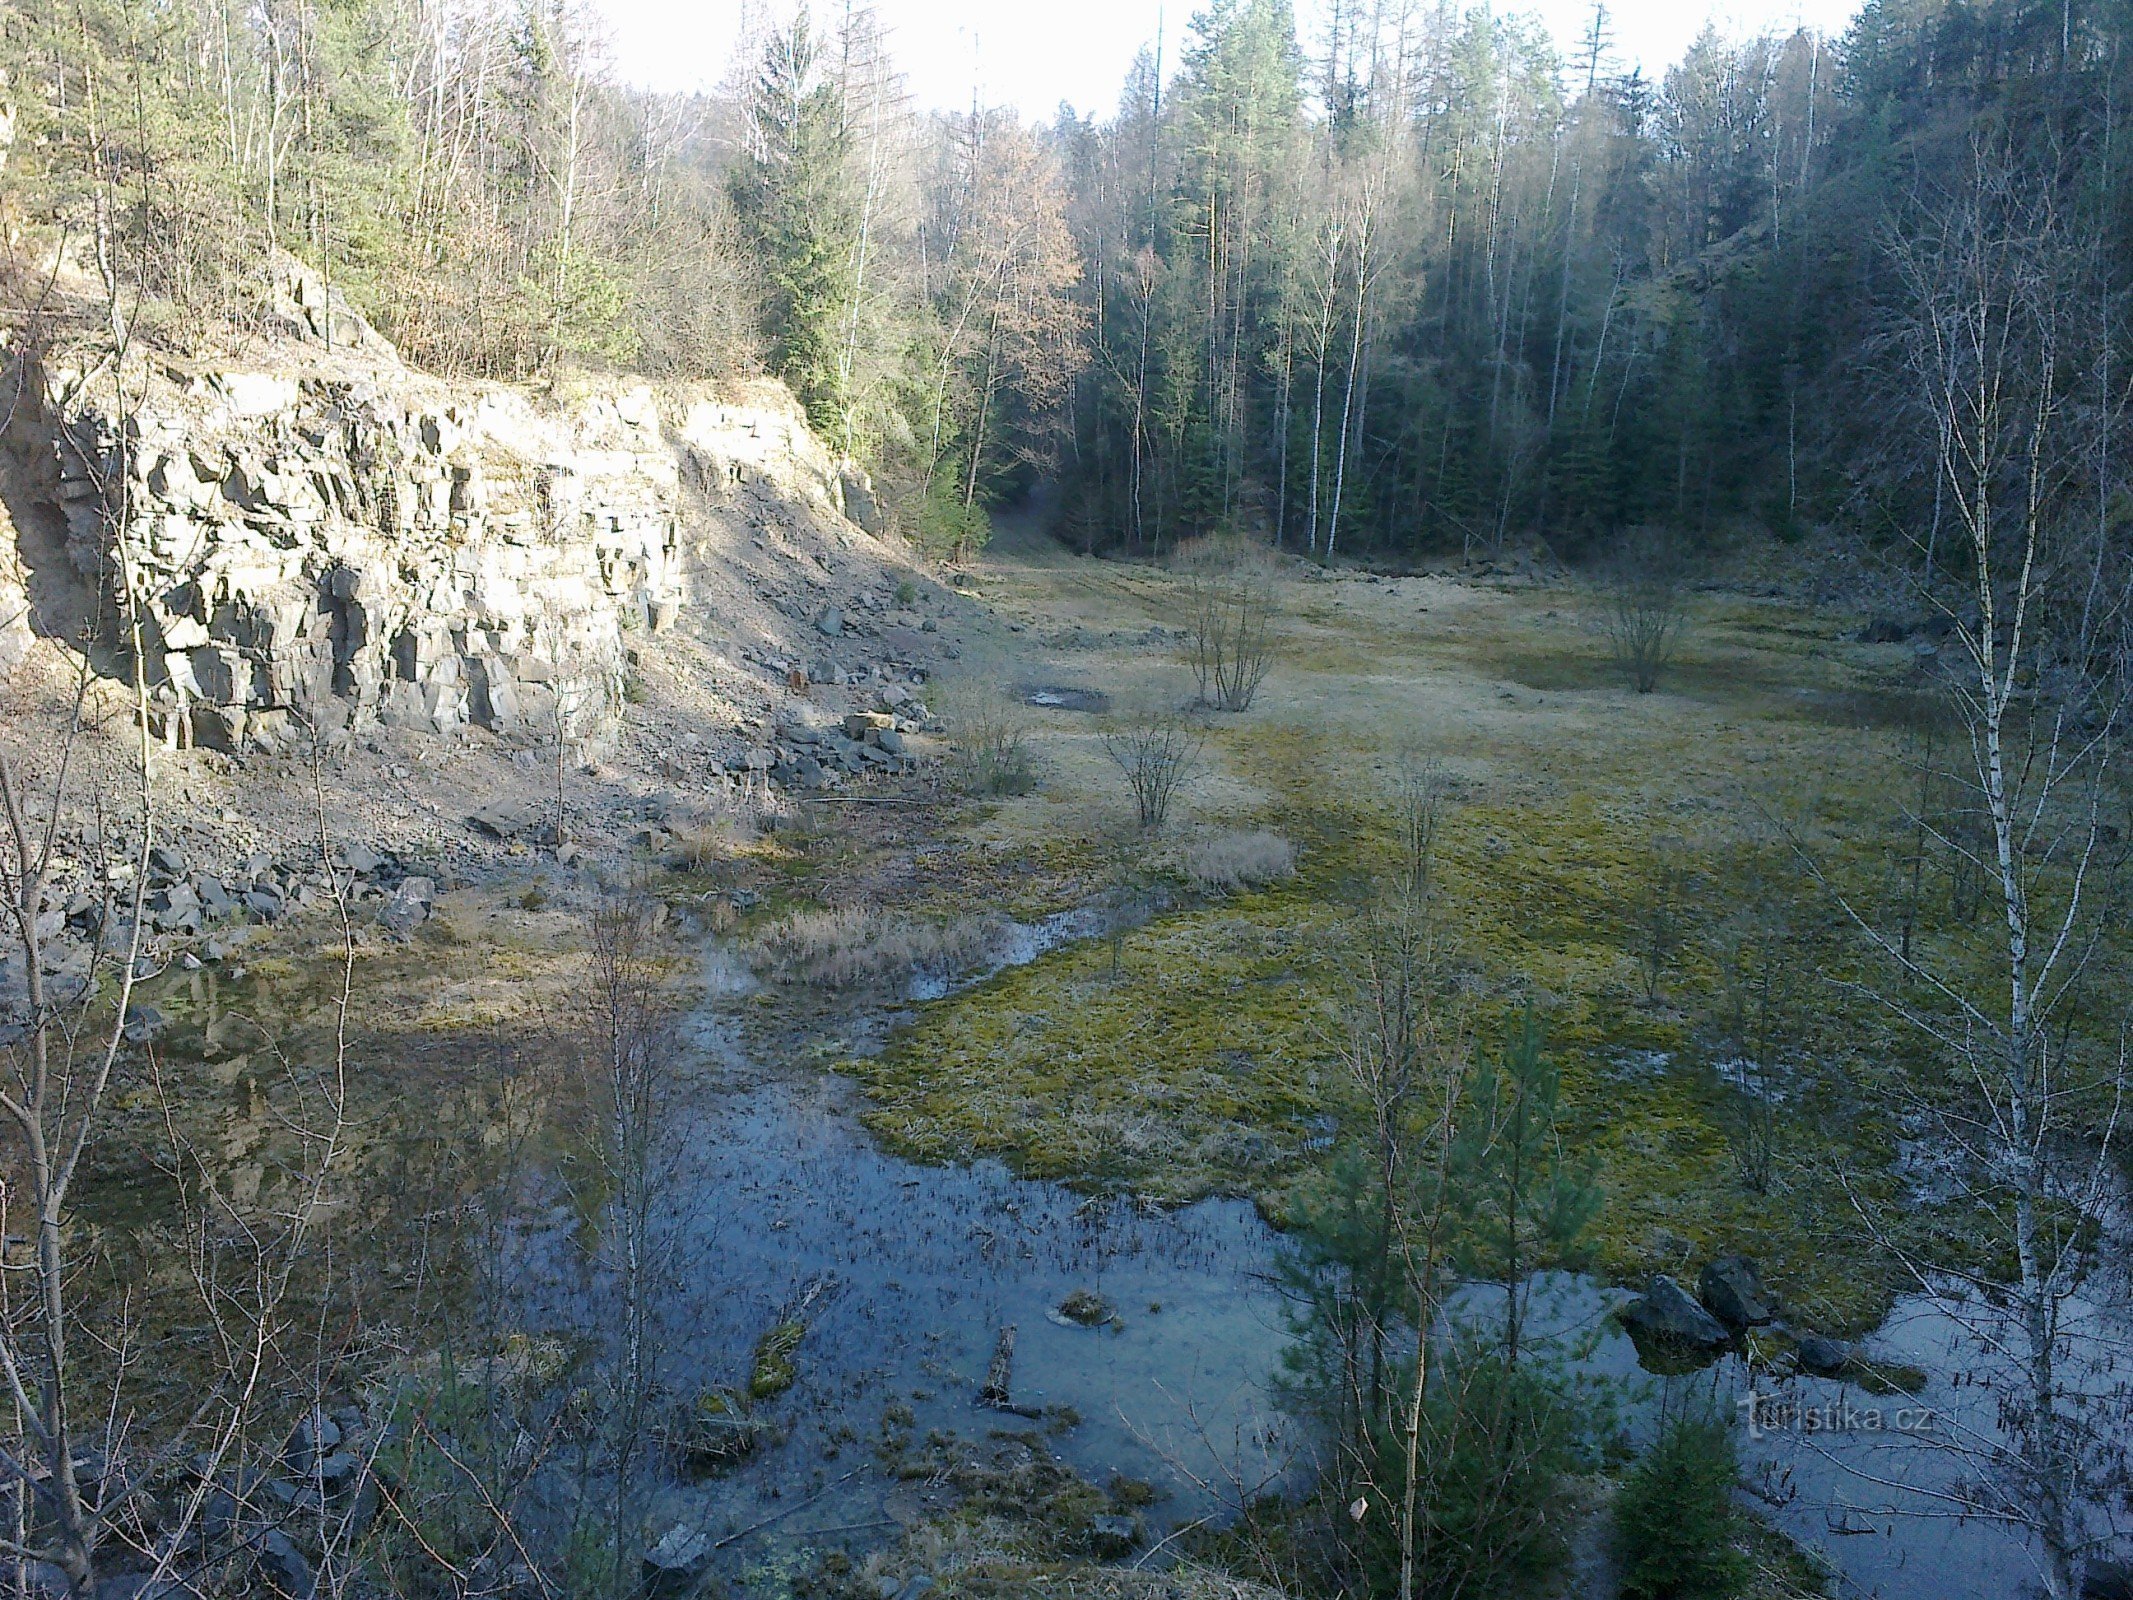 Wetland in the quarry